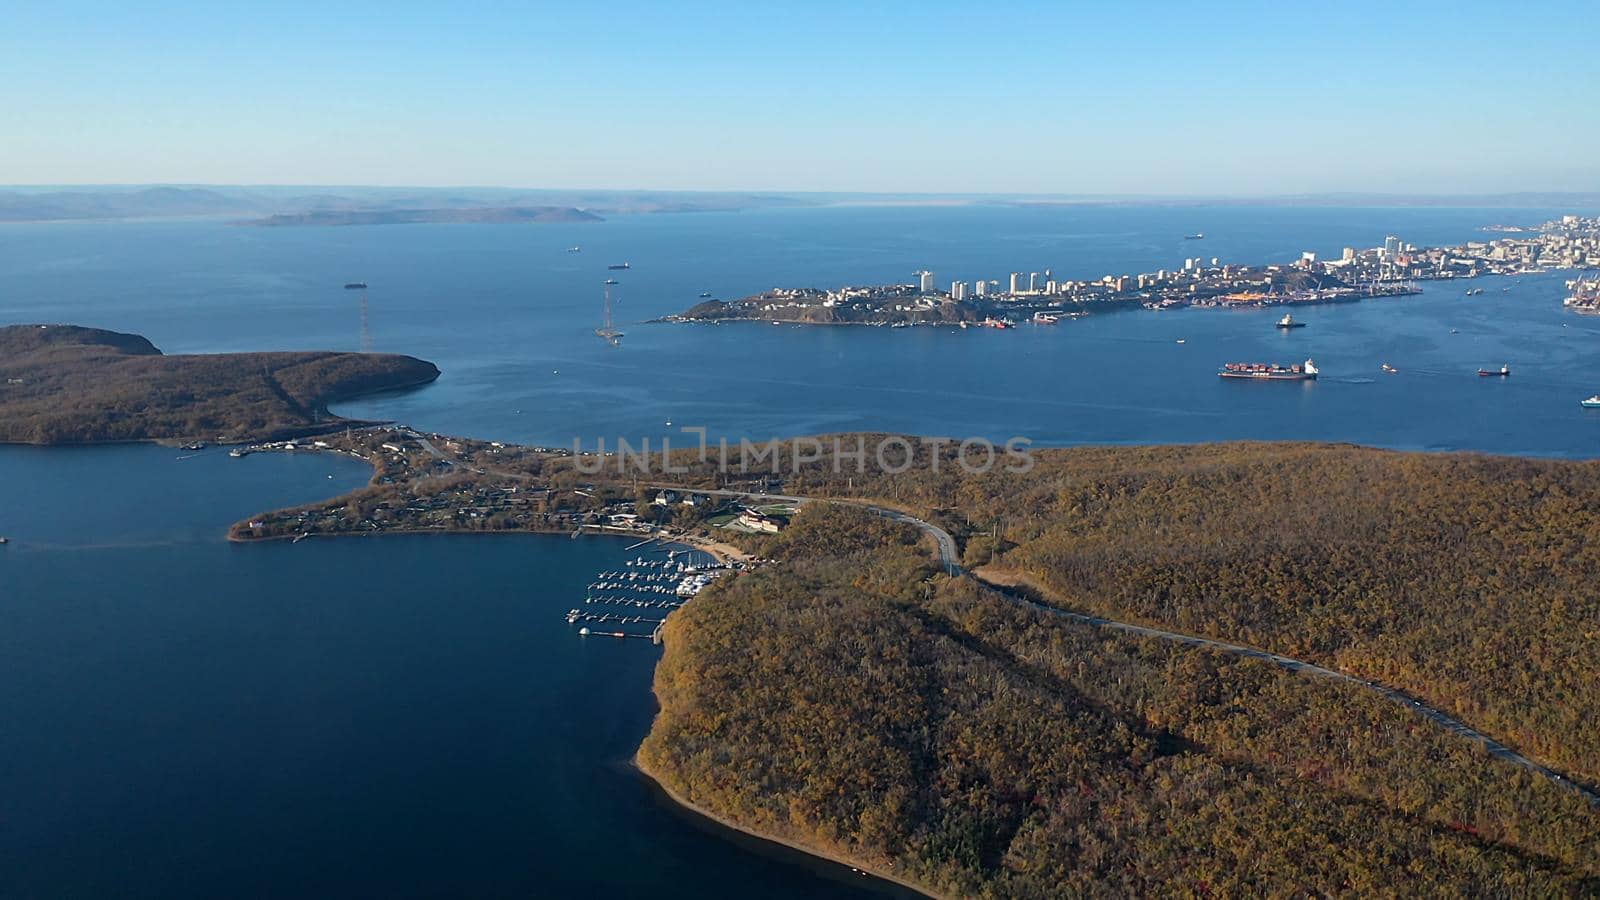 Aerial view of the seascape overlooking the bays of Vladivostok, Russia